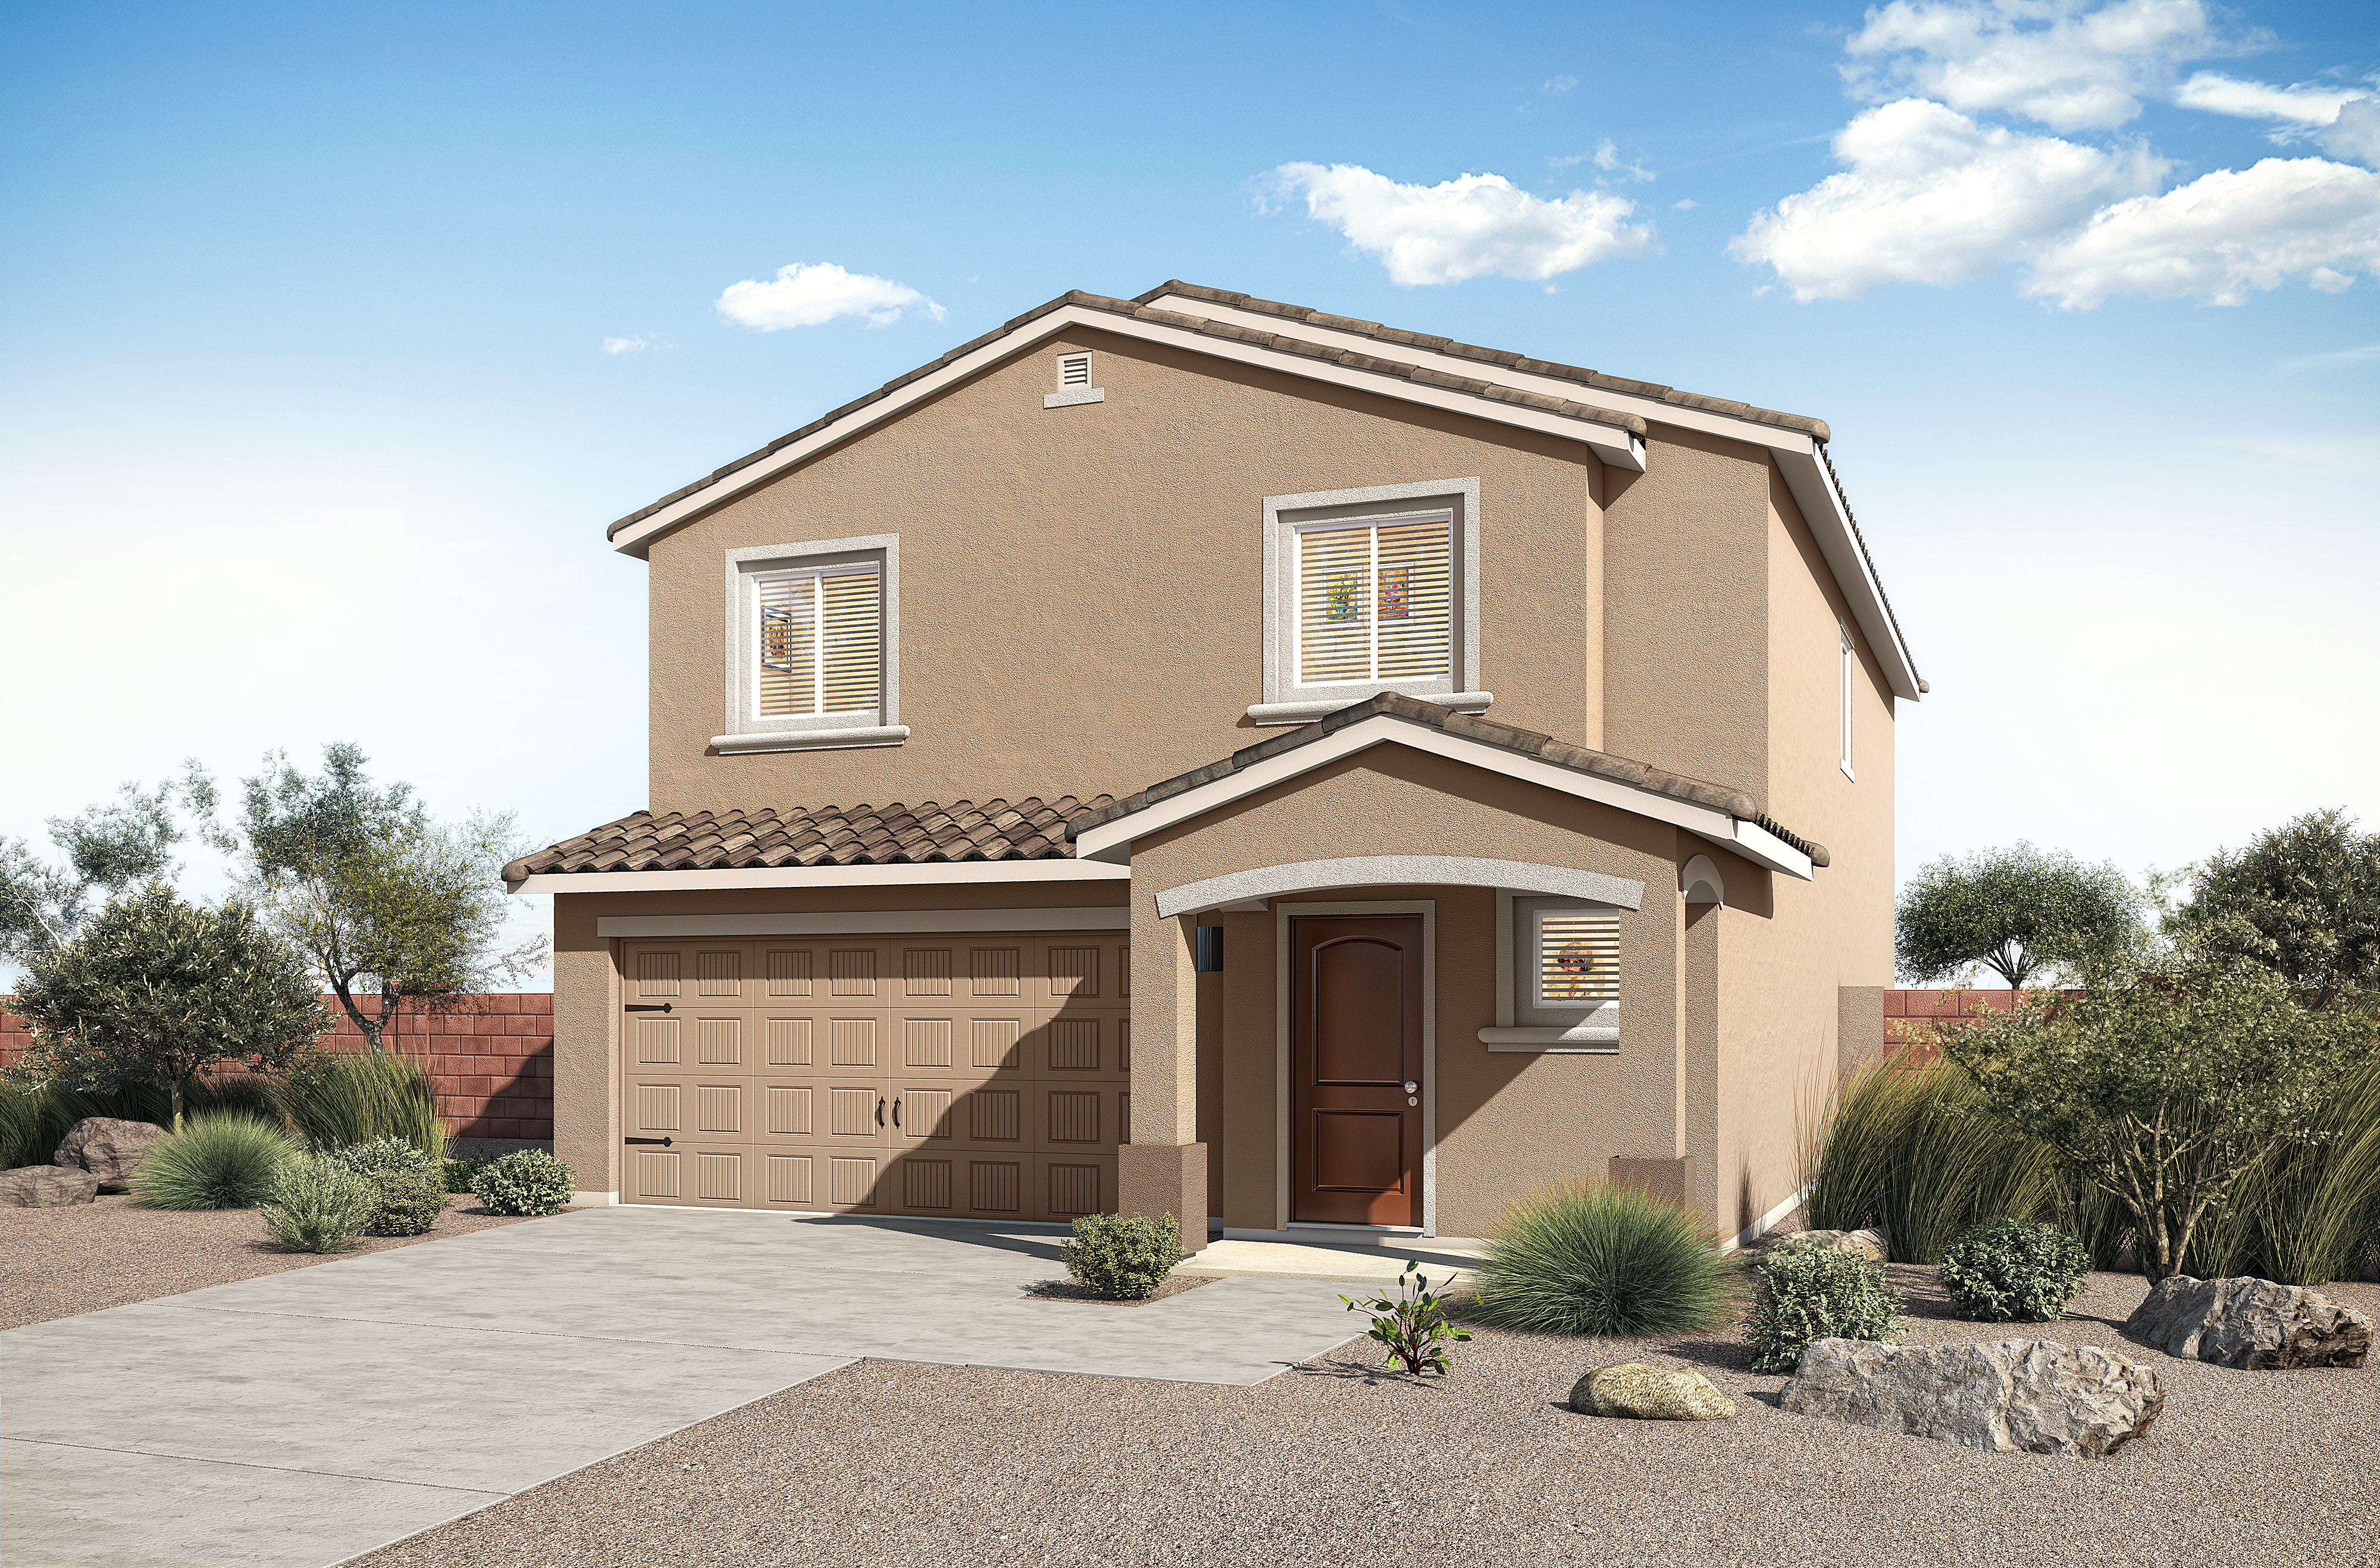 The Palo Verde floor plan at SC Ranch by LGI Homes.